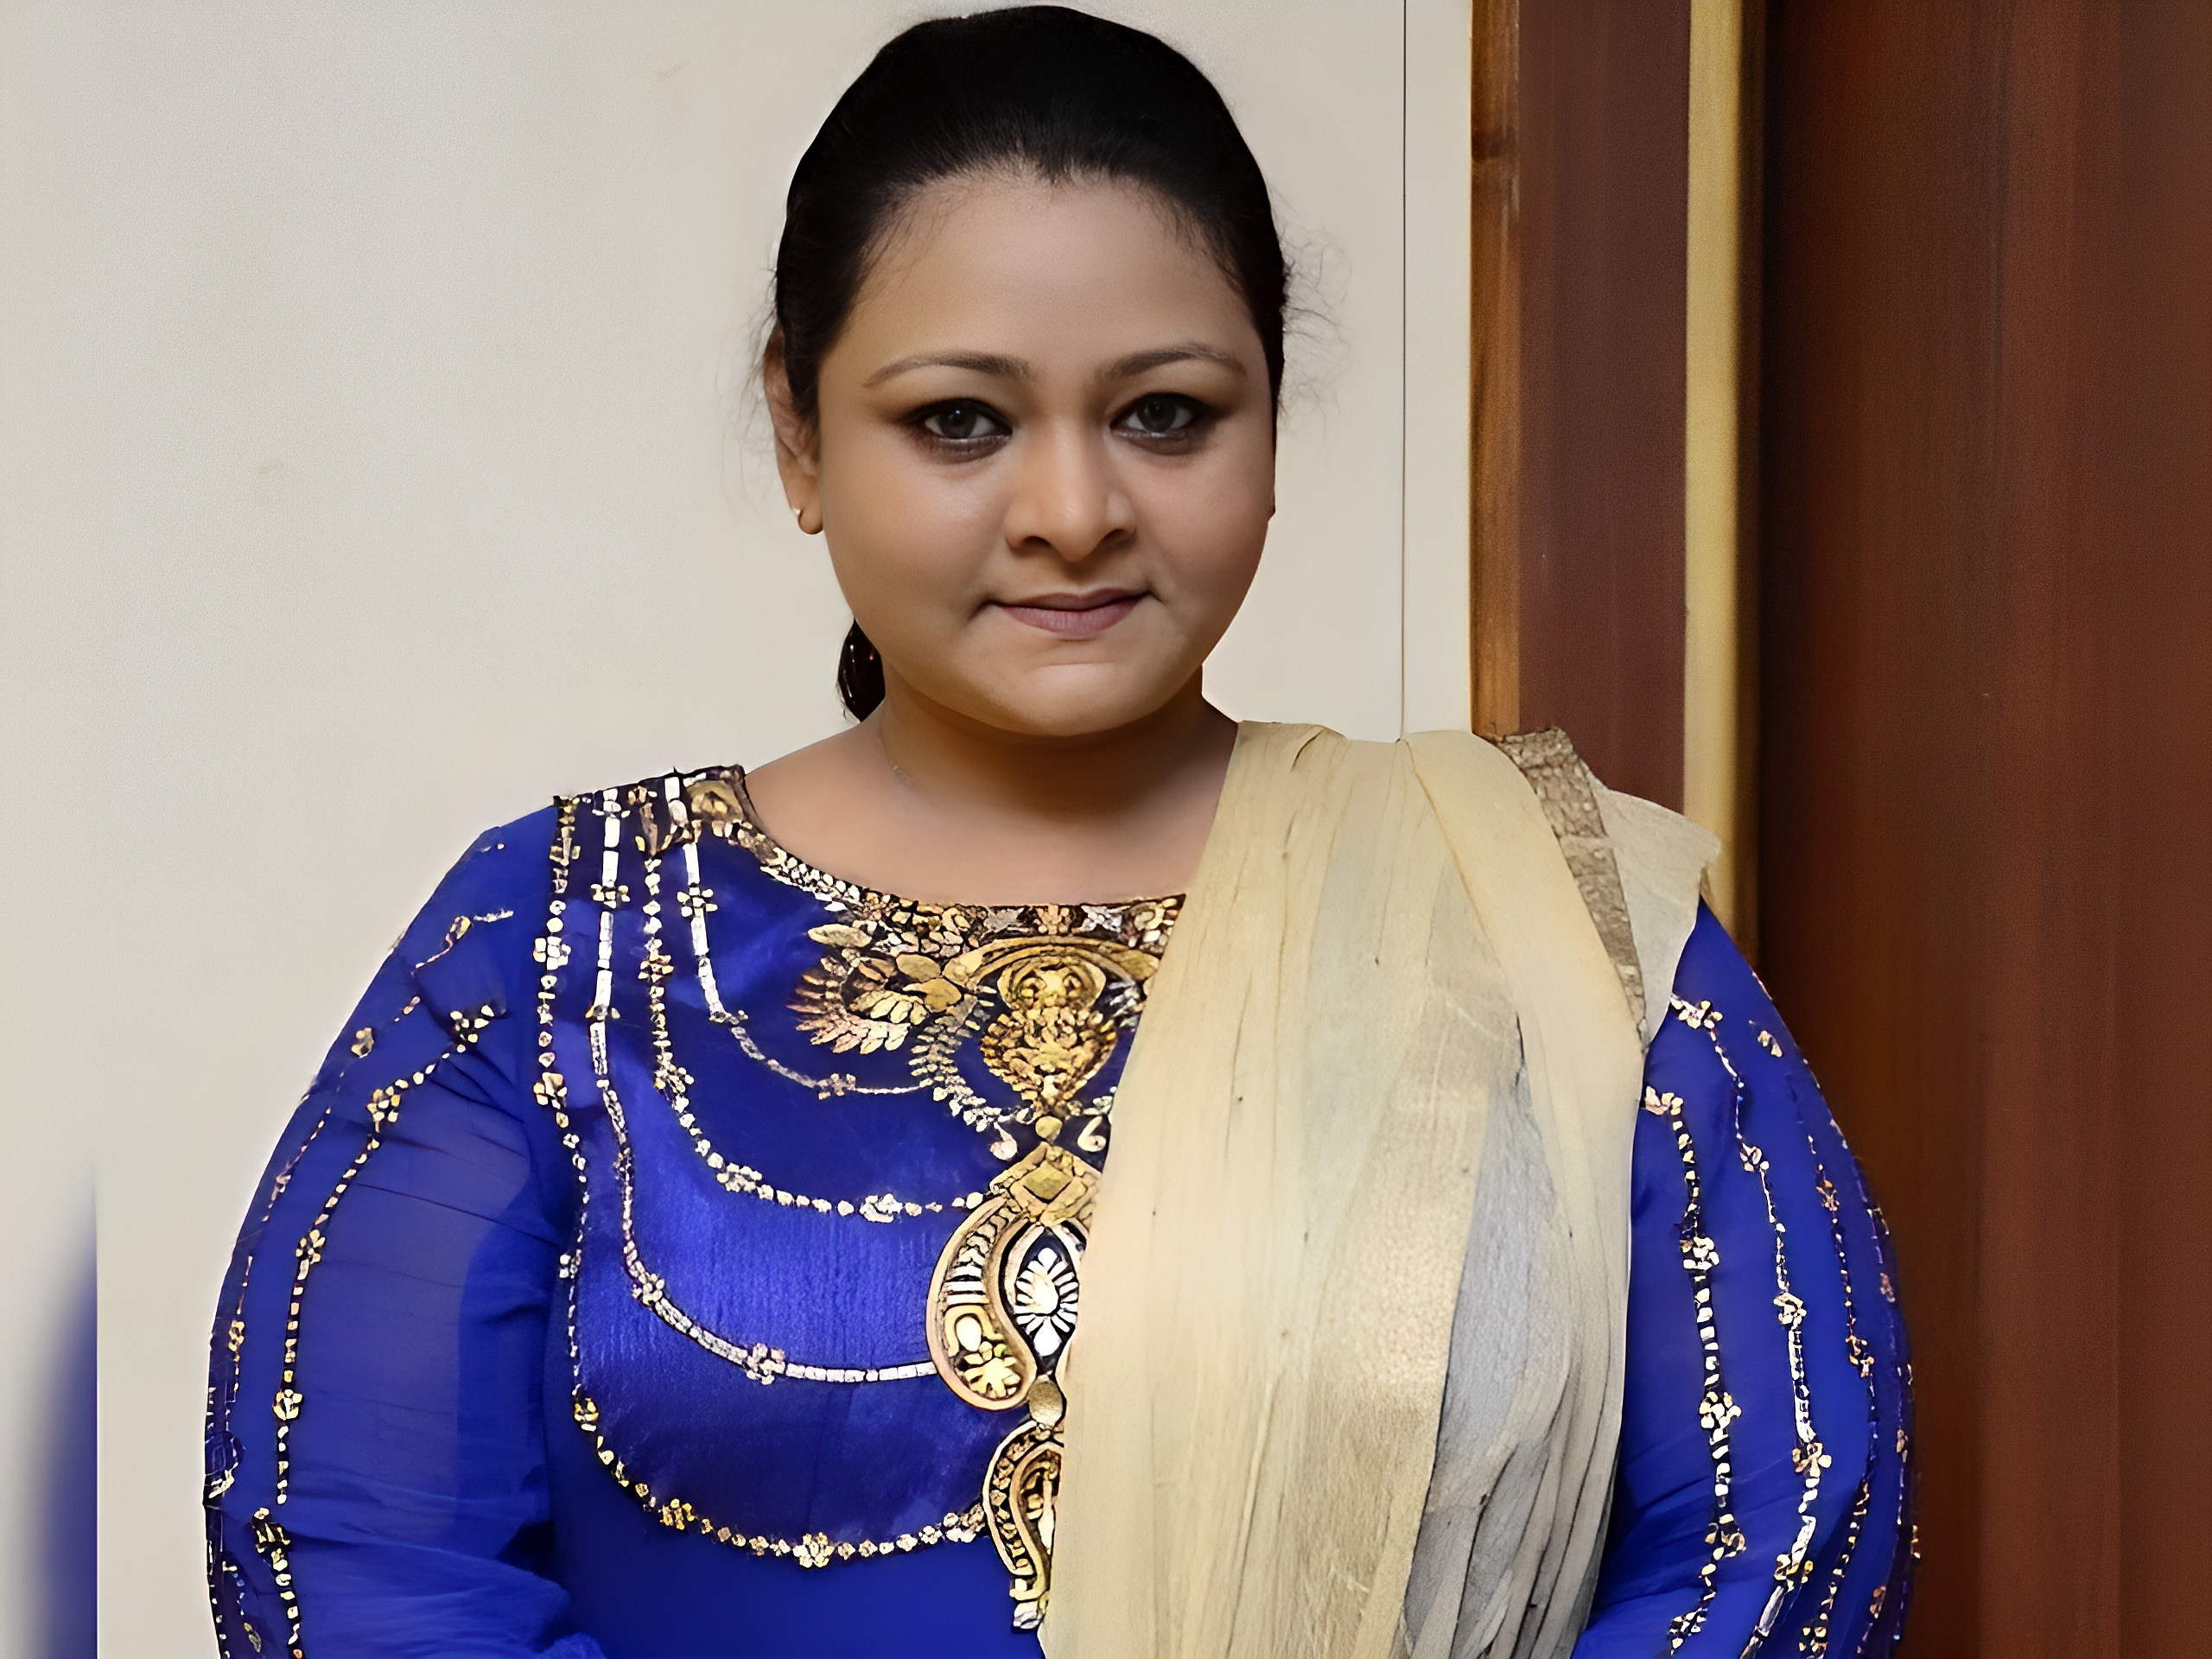 Xxx Kannada Film Actress Movies - Shakeela Biography, Wiki, Age, Caste, Height, Weight, Movies, Songs,  Images, Family, Marriage, Husband, Bigg Boss 7 Telugu and more - StudyBizz  Bigg Boss